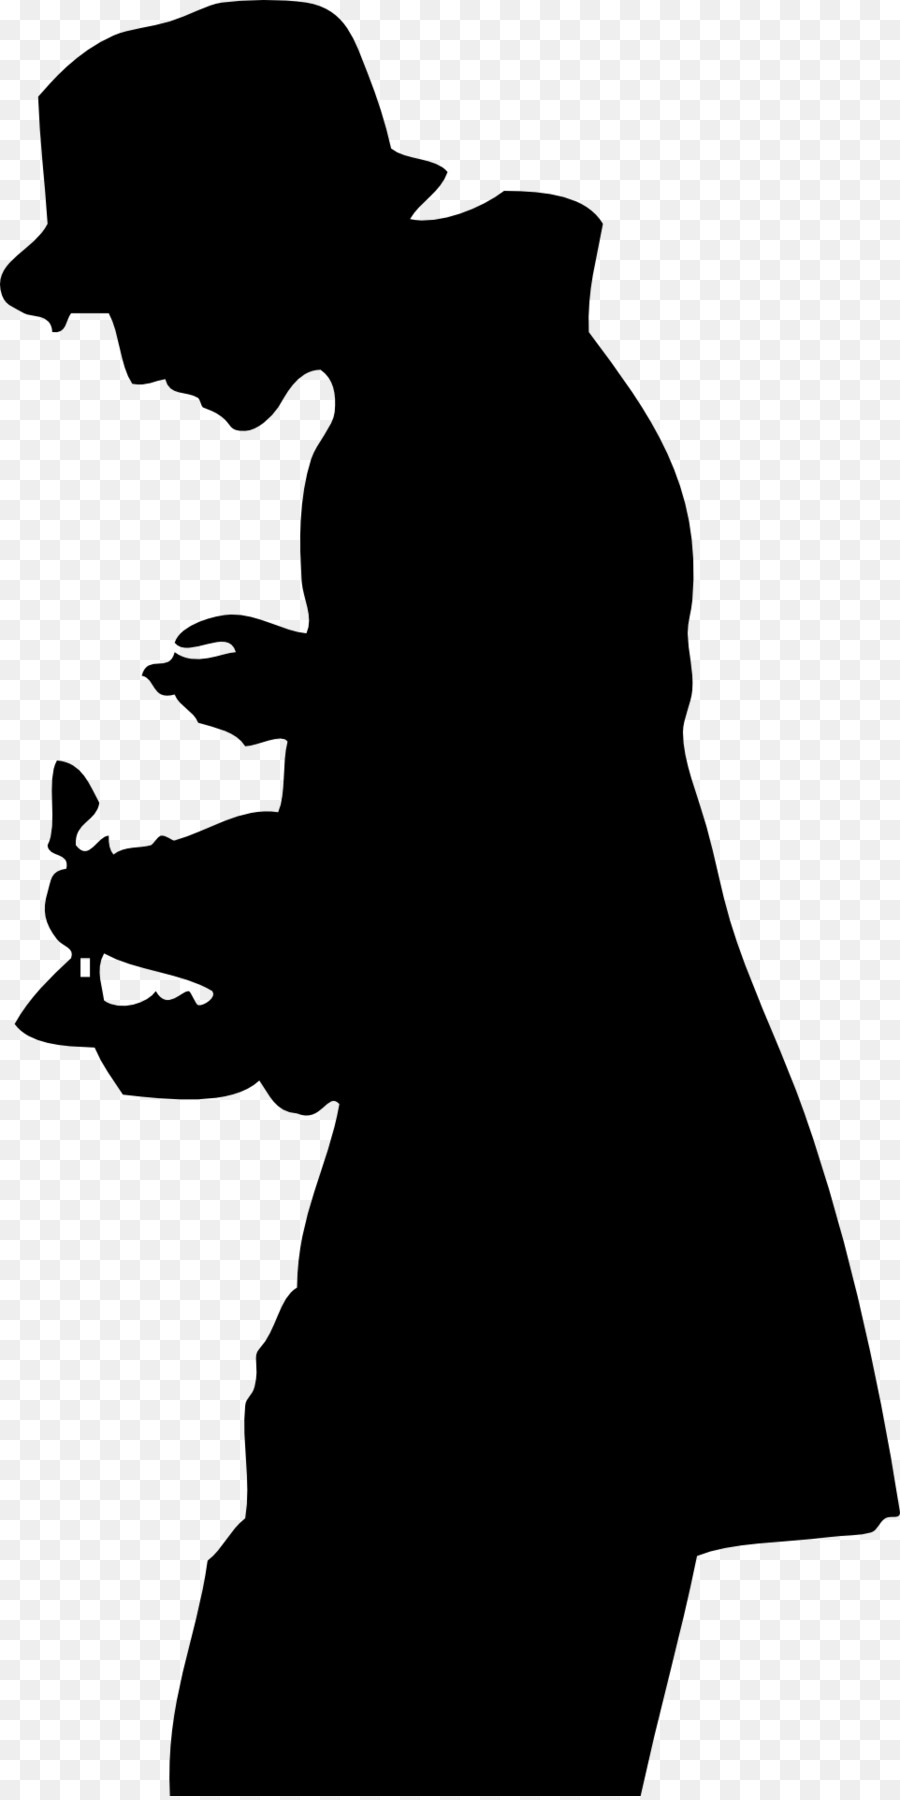 Silhouette - Top Hat Cartoon - CleanPNG / KissPNG